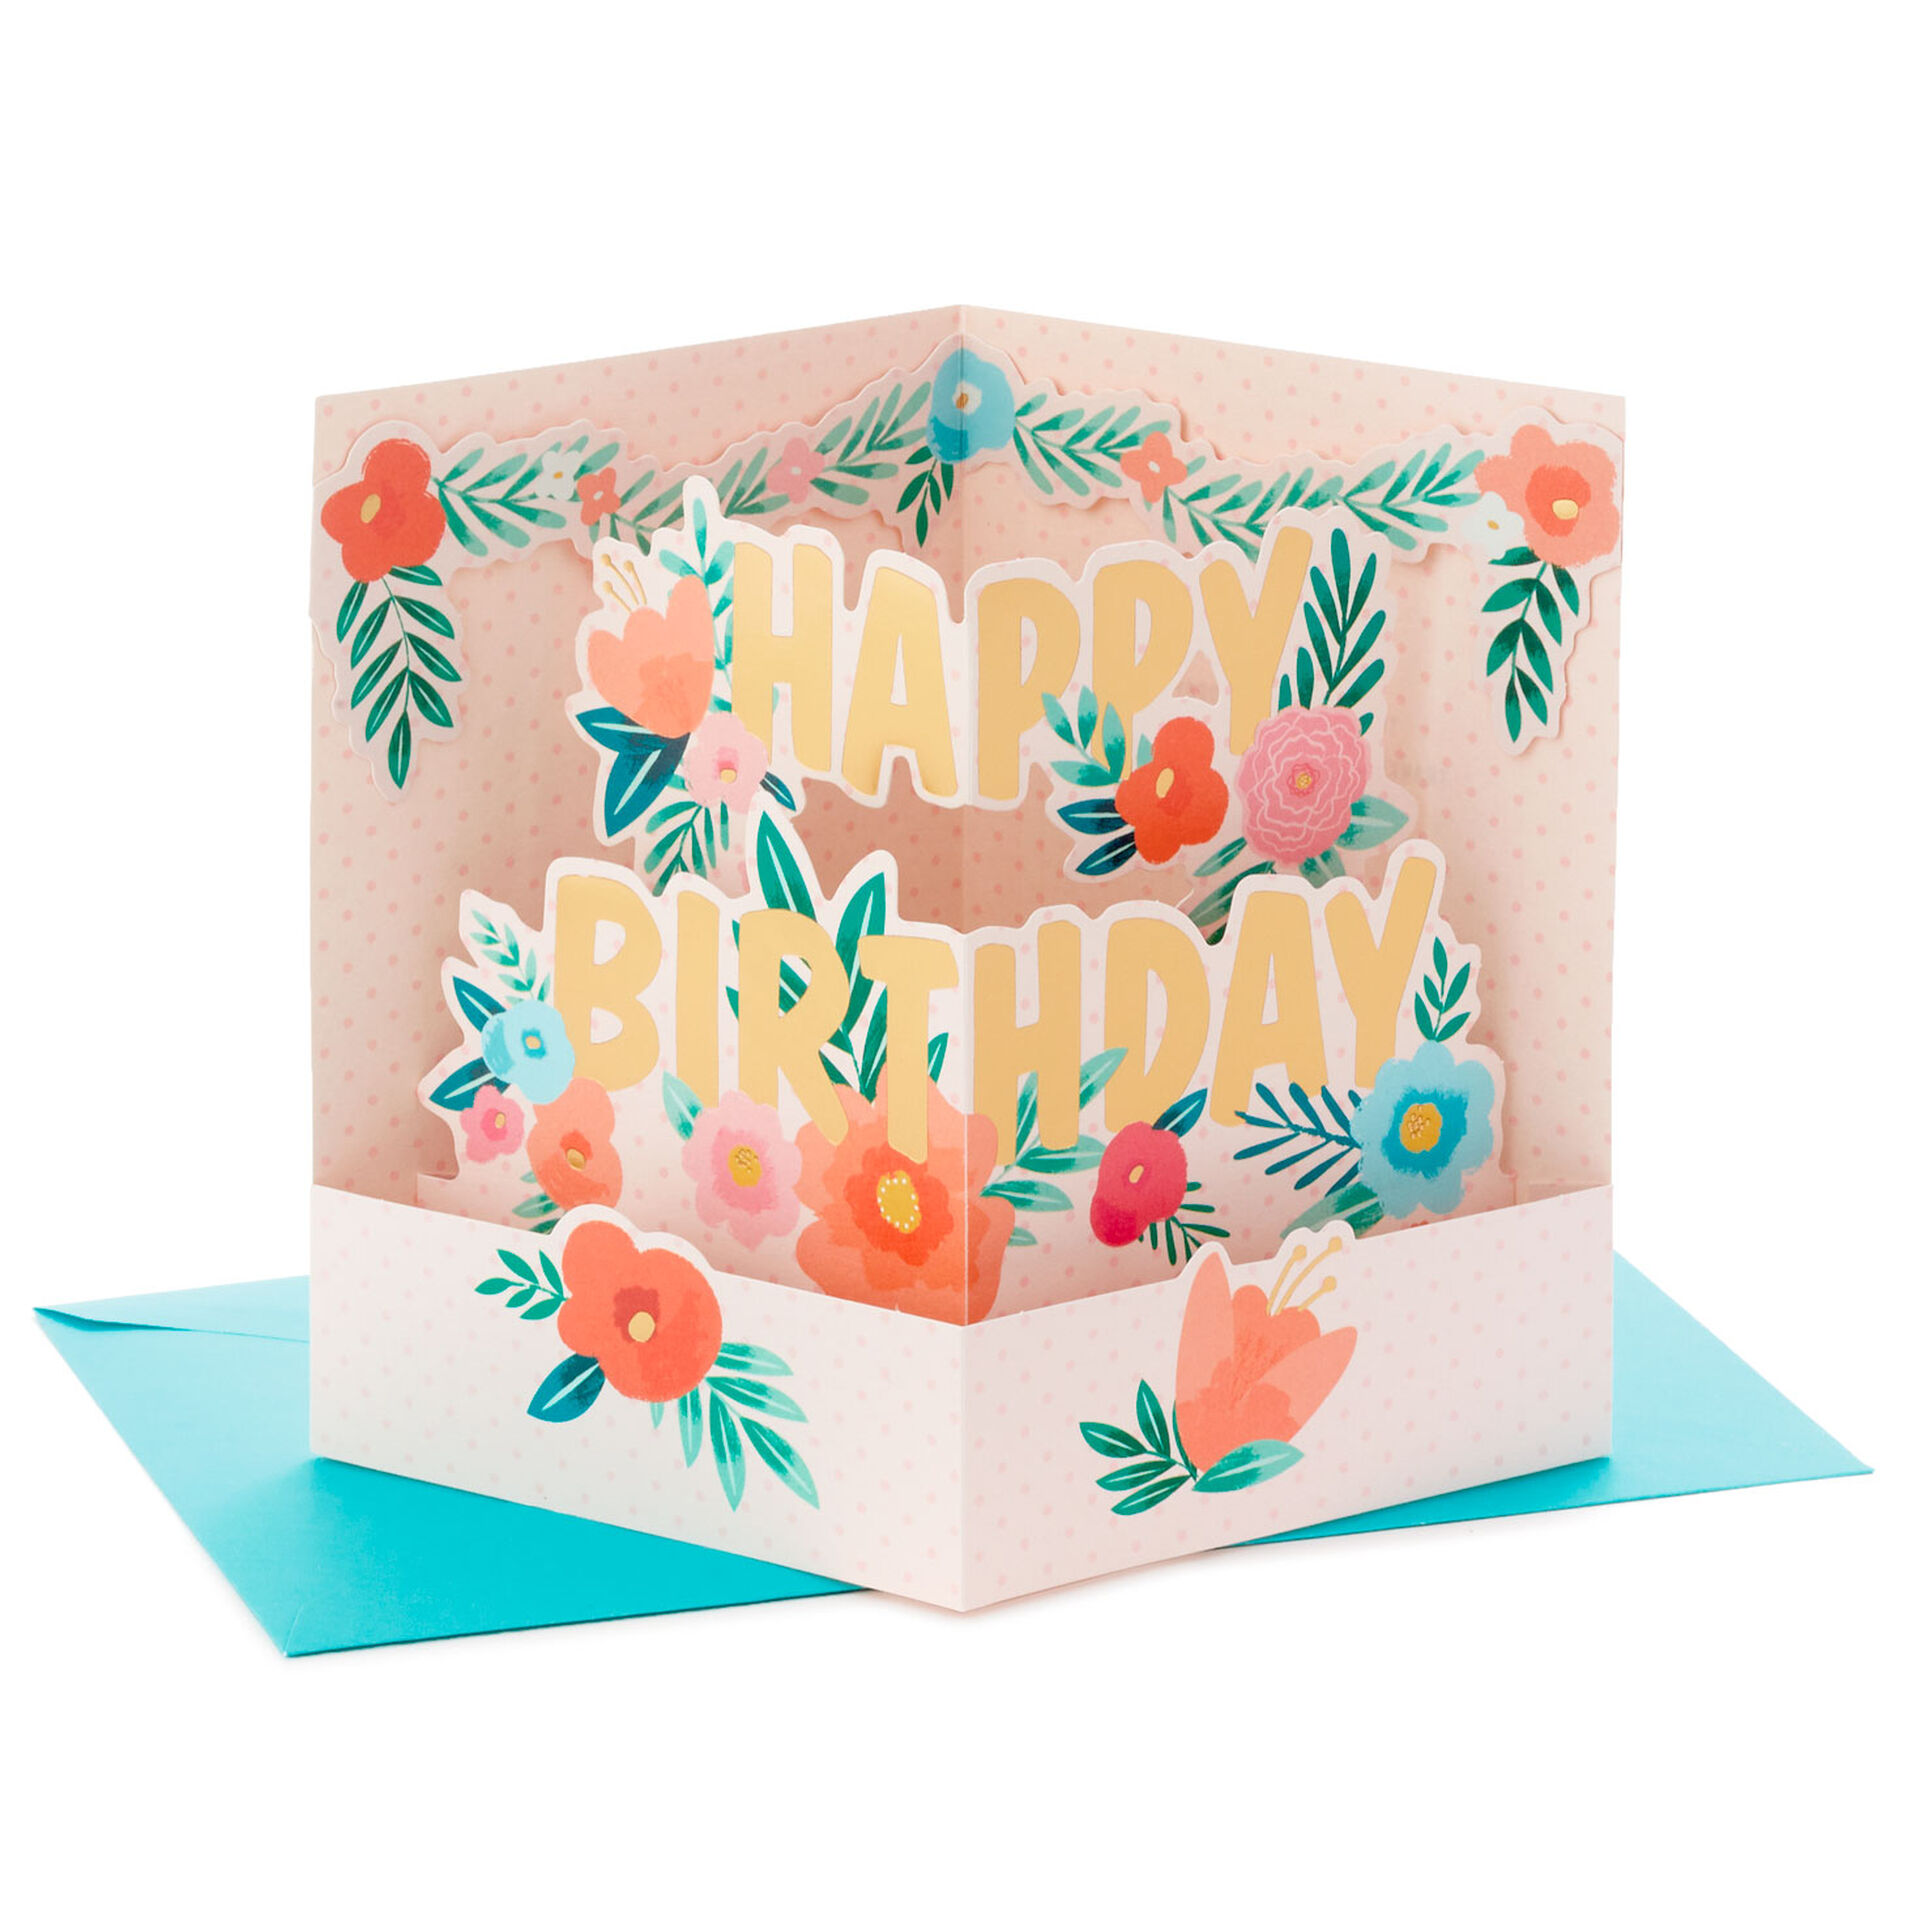 Flowers-3D-PopUp-Birthday-Card-for-Her_699WDR1155_01